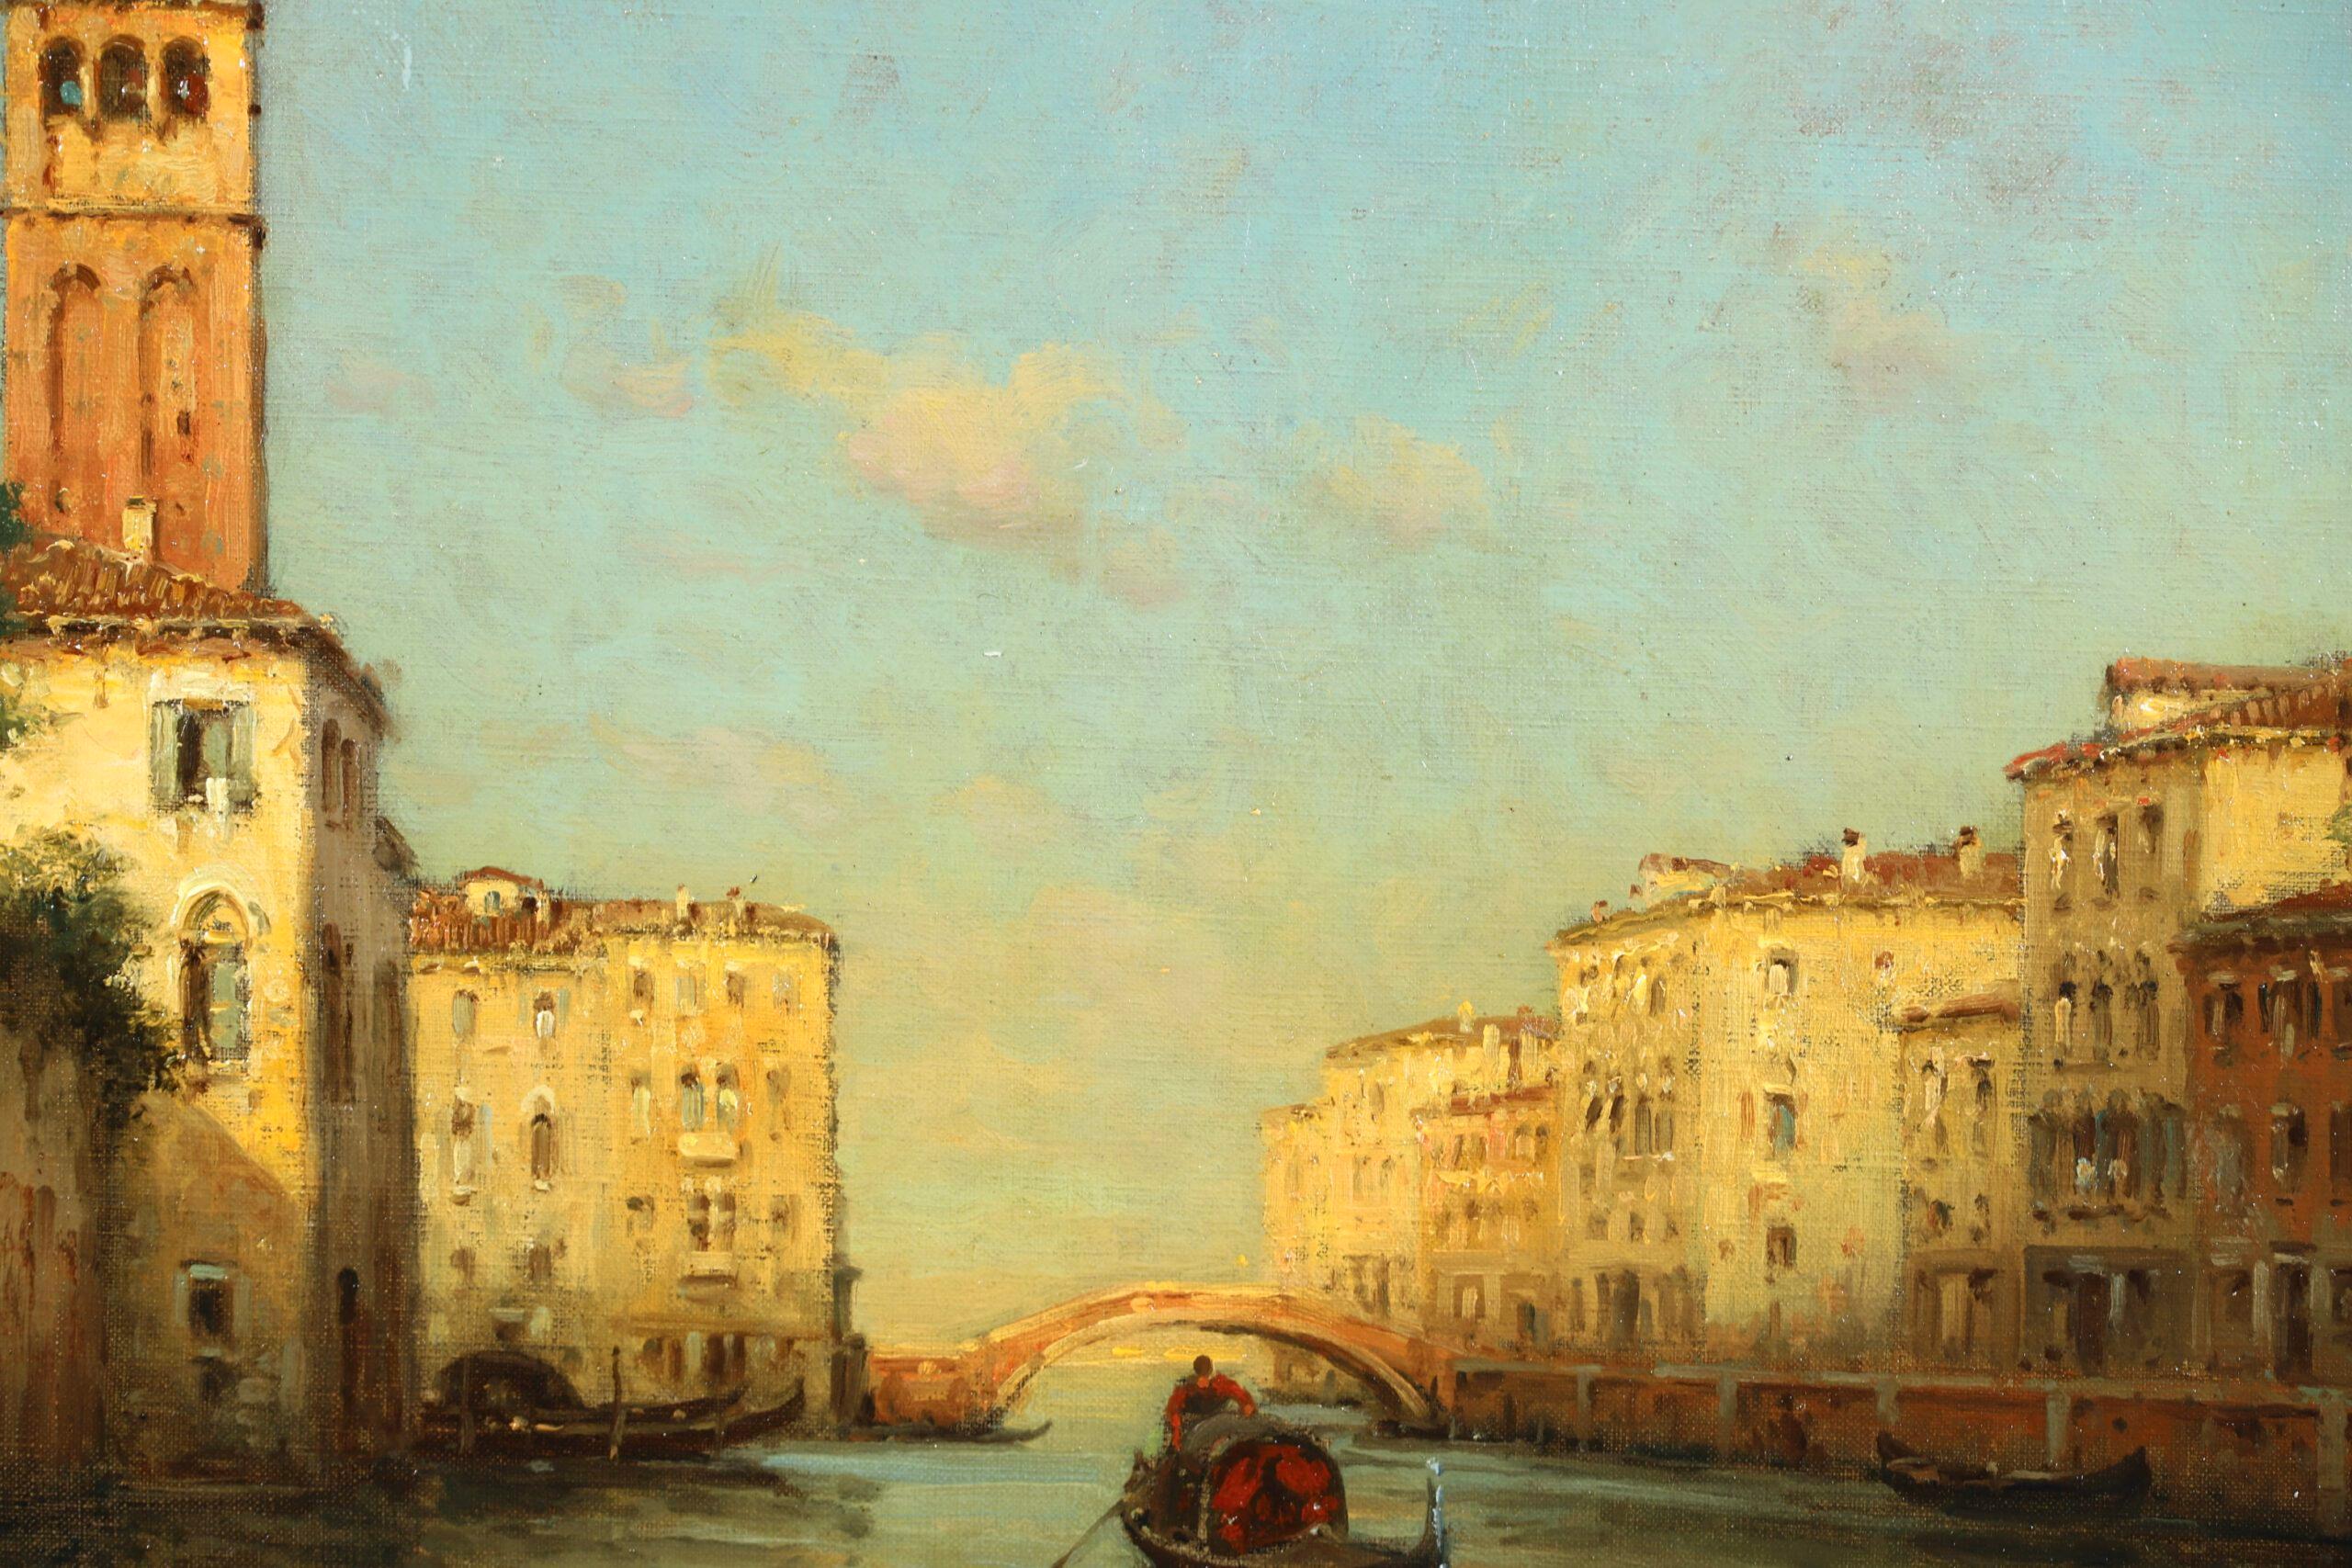 Gondolier on a Canal - Impressionist Landscape Oil Painting by Antoine Bouvard For Sale 2